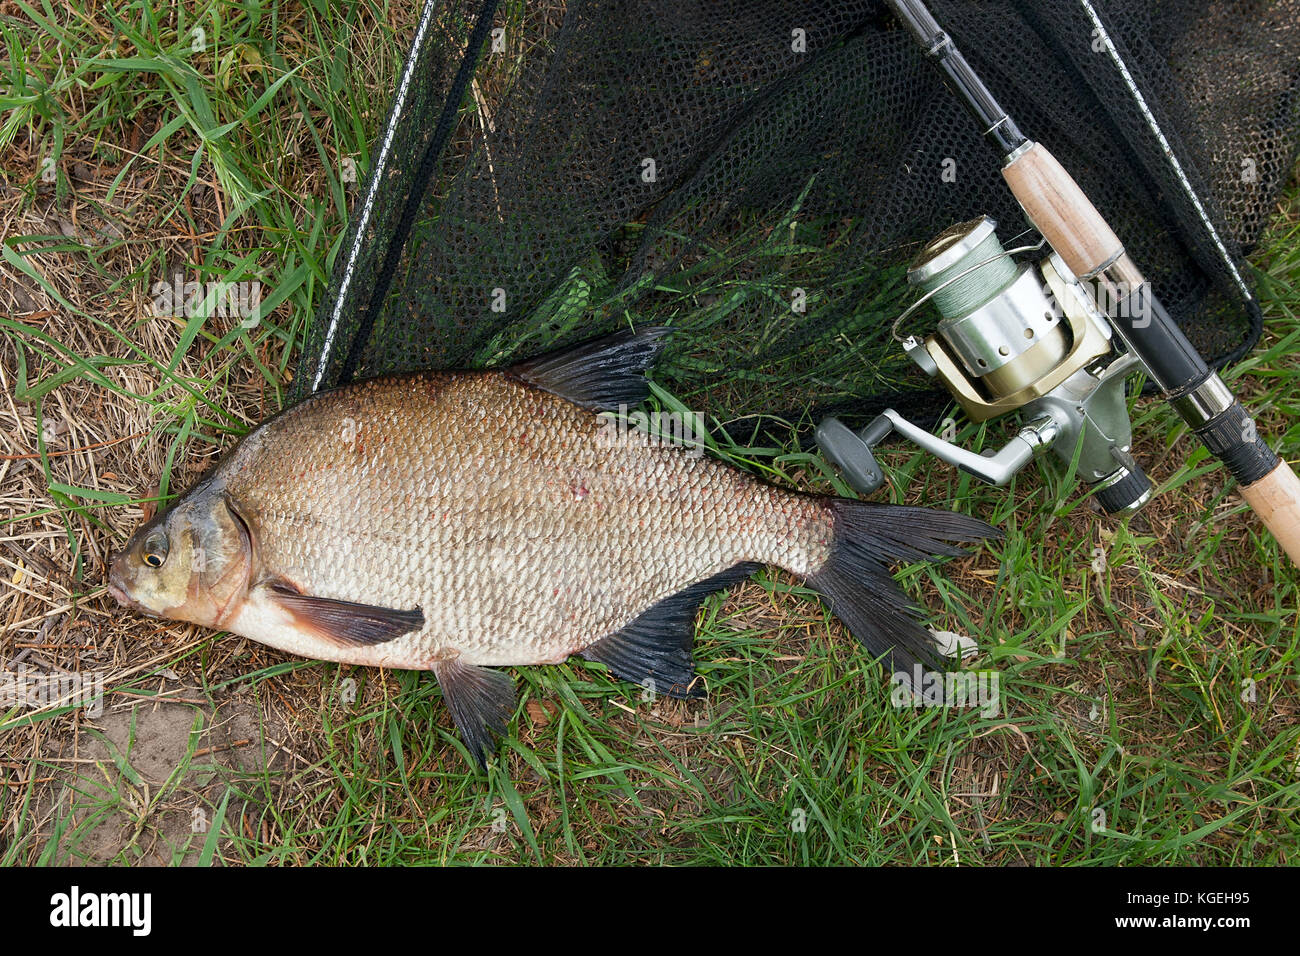 Just taken from the water freshwater common bream known as bronze bream or carp bream (Abramis brama) and fishing rod with reel on natural background. Stock Photo